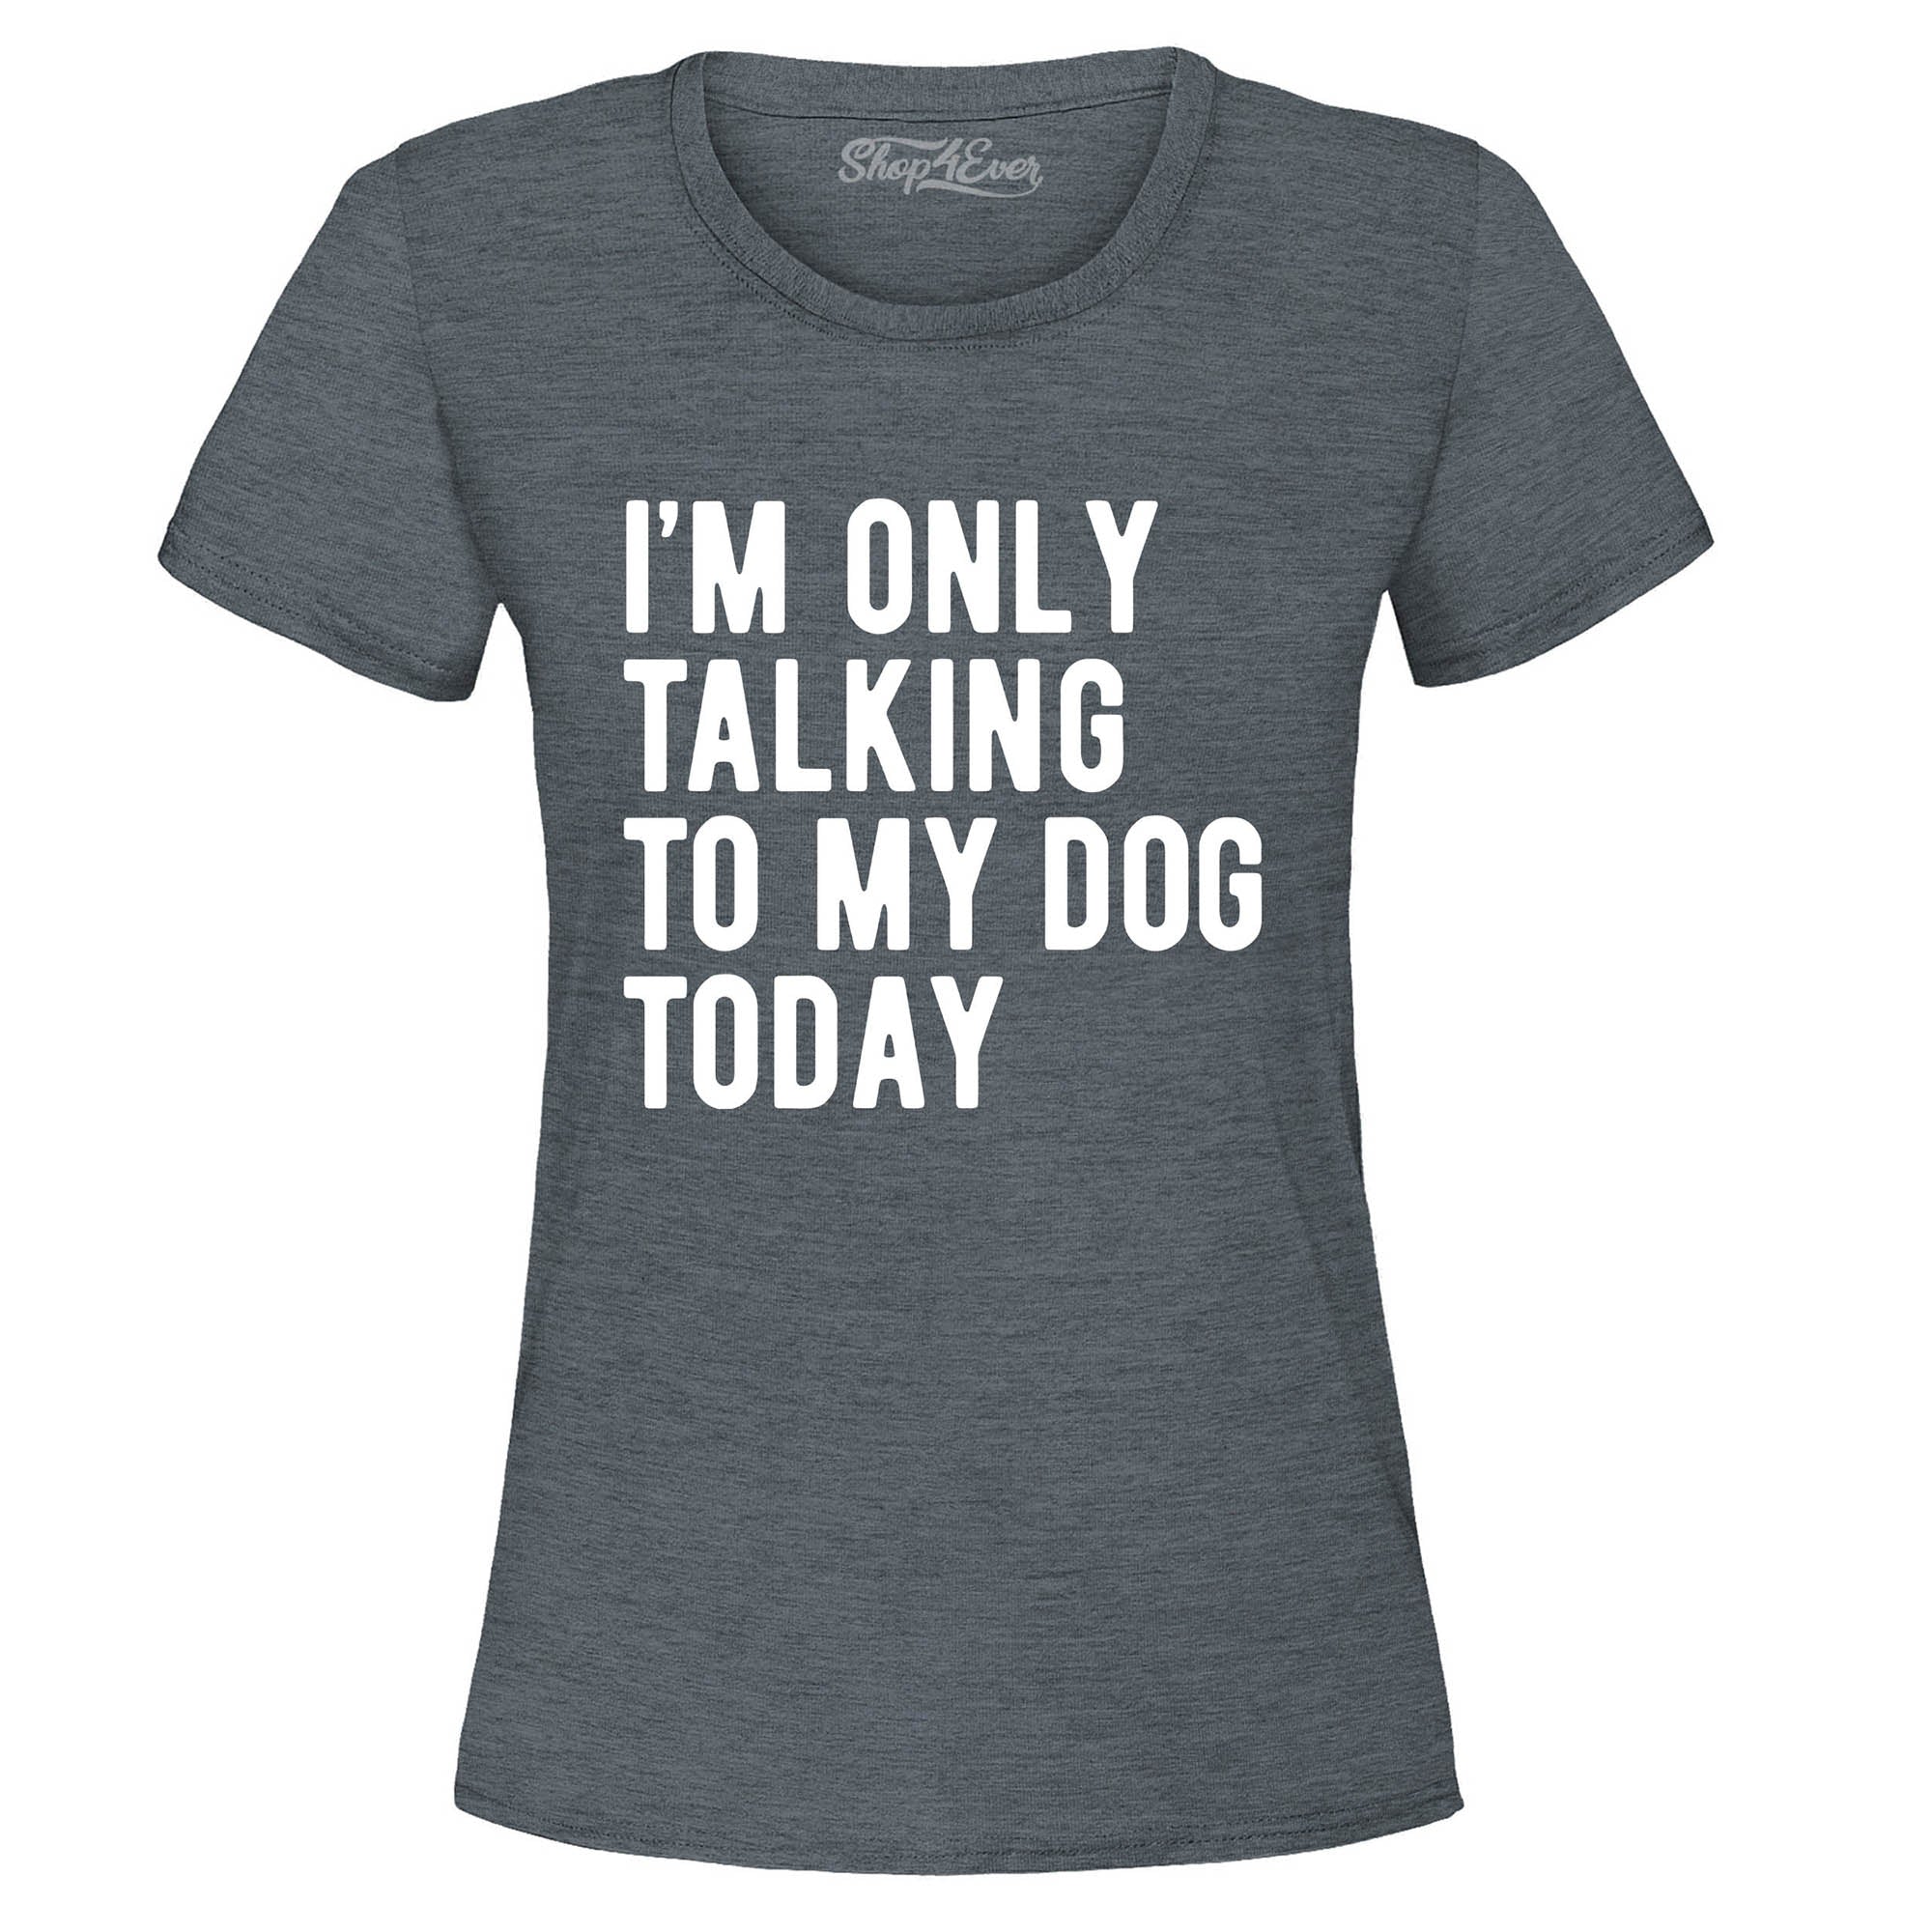 I'm Only Talking to My Dog Today Women's T-Shirt